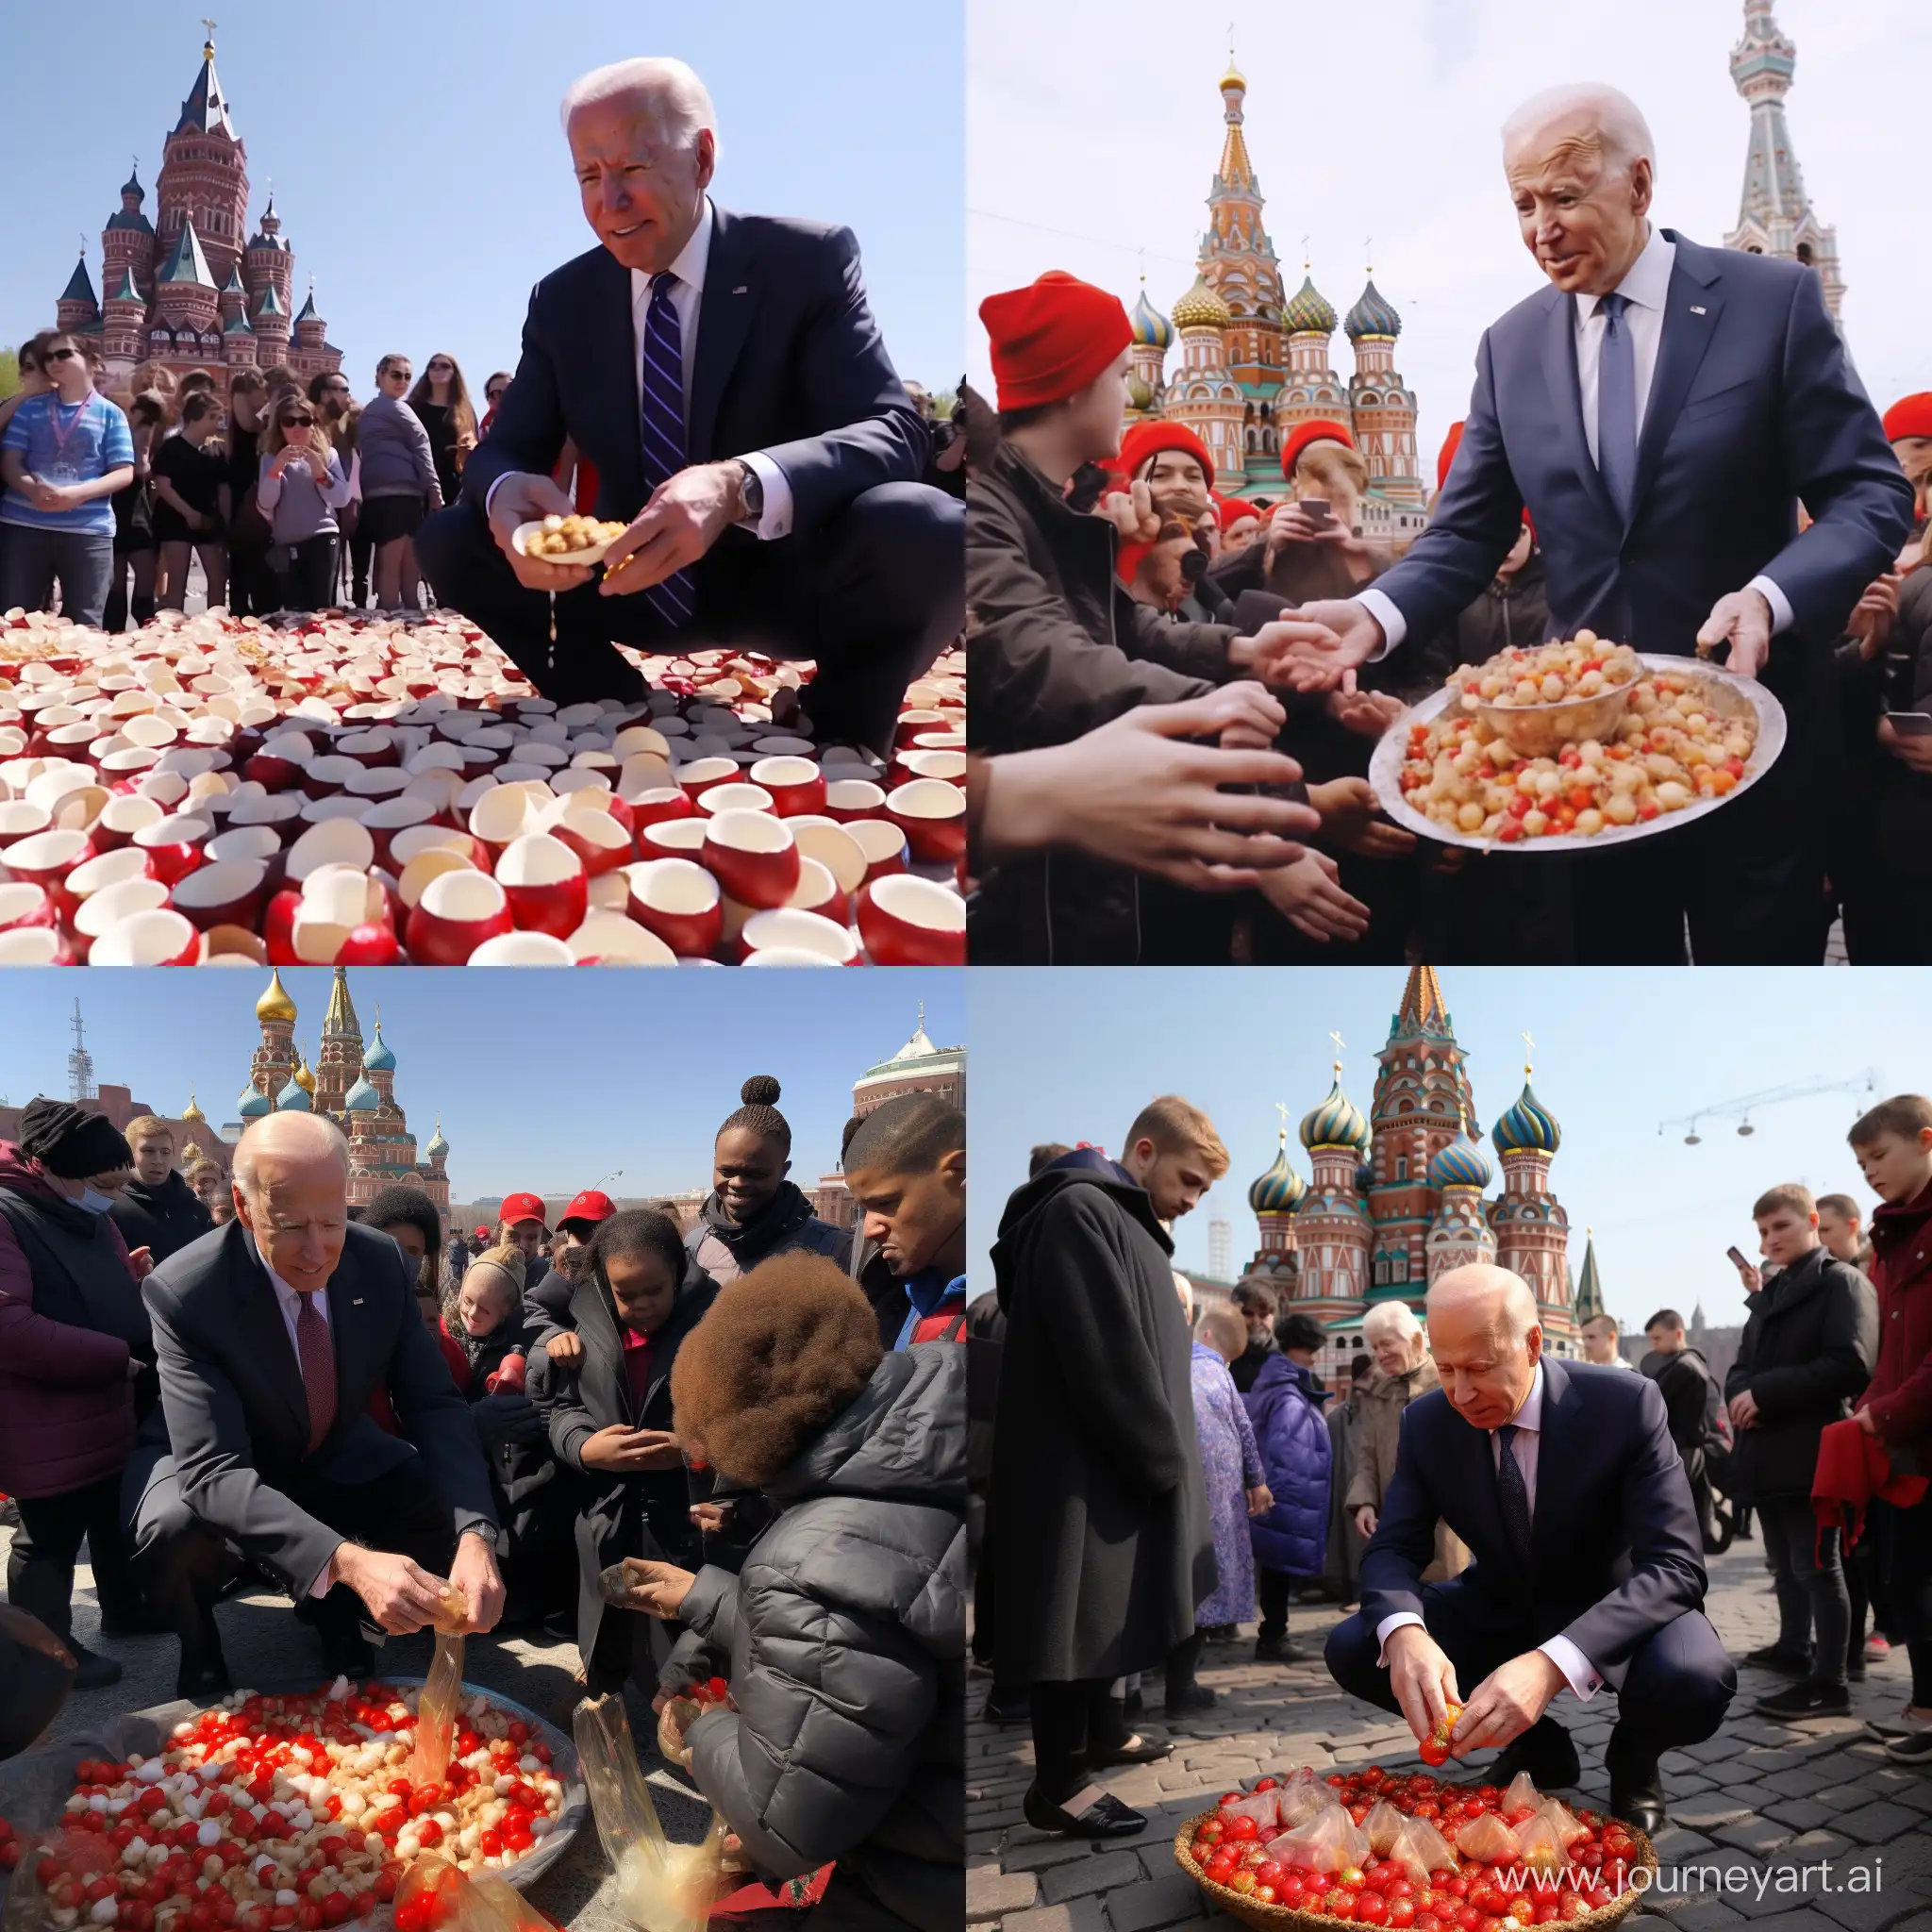 Joe-Biden-Generously-Distributes-Eggs-to-the-Needy-on-the-Iconic-Red-Square